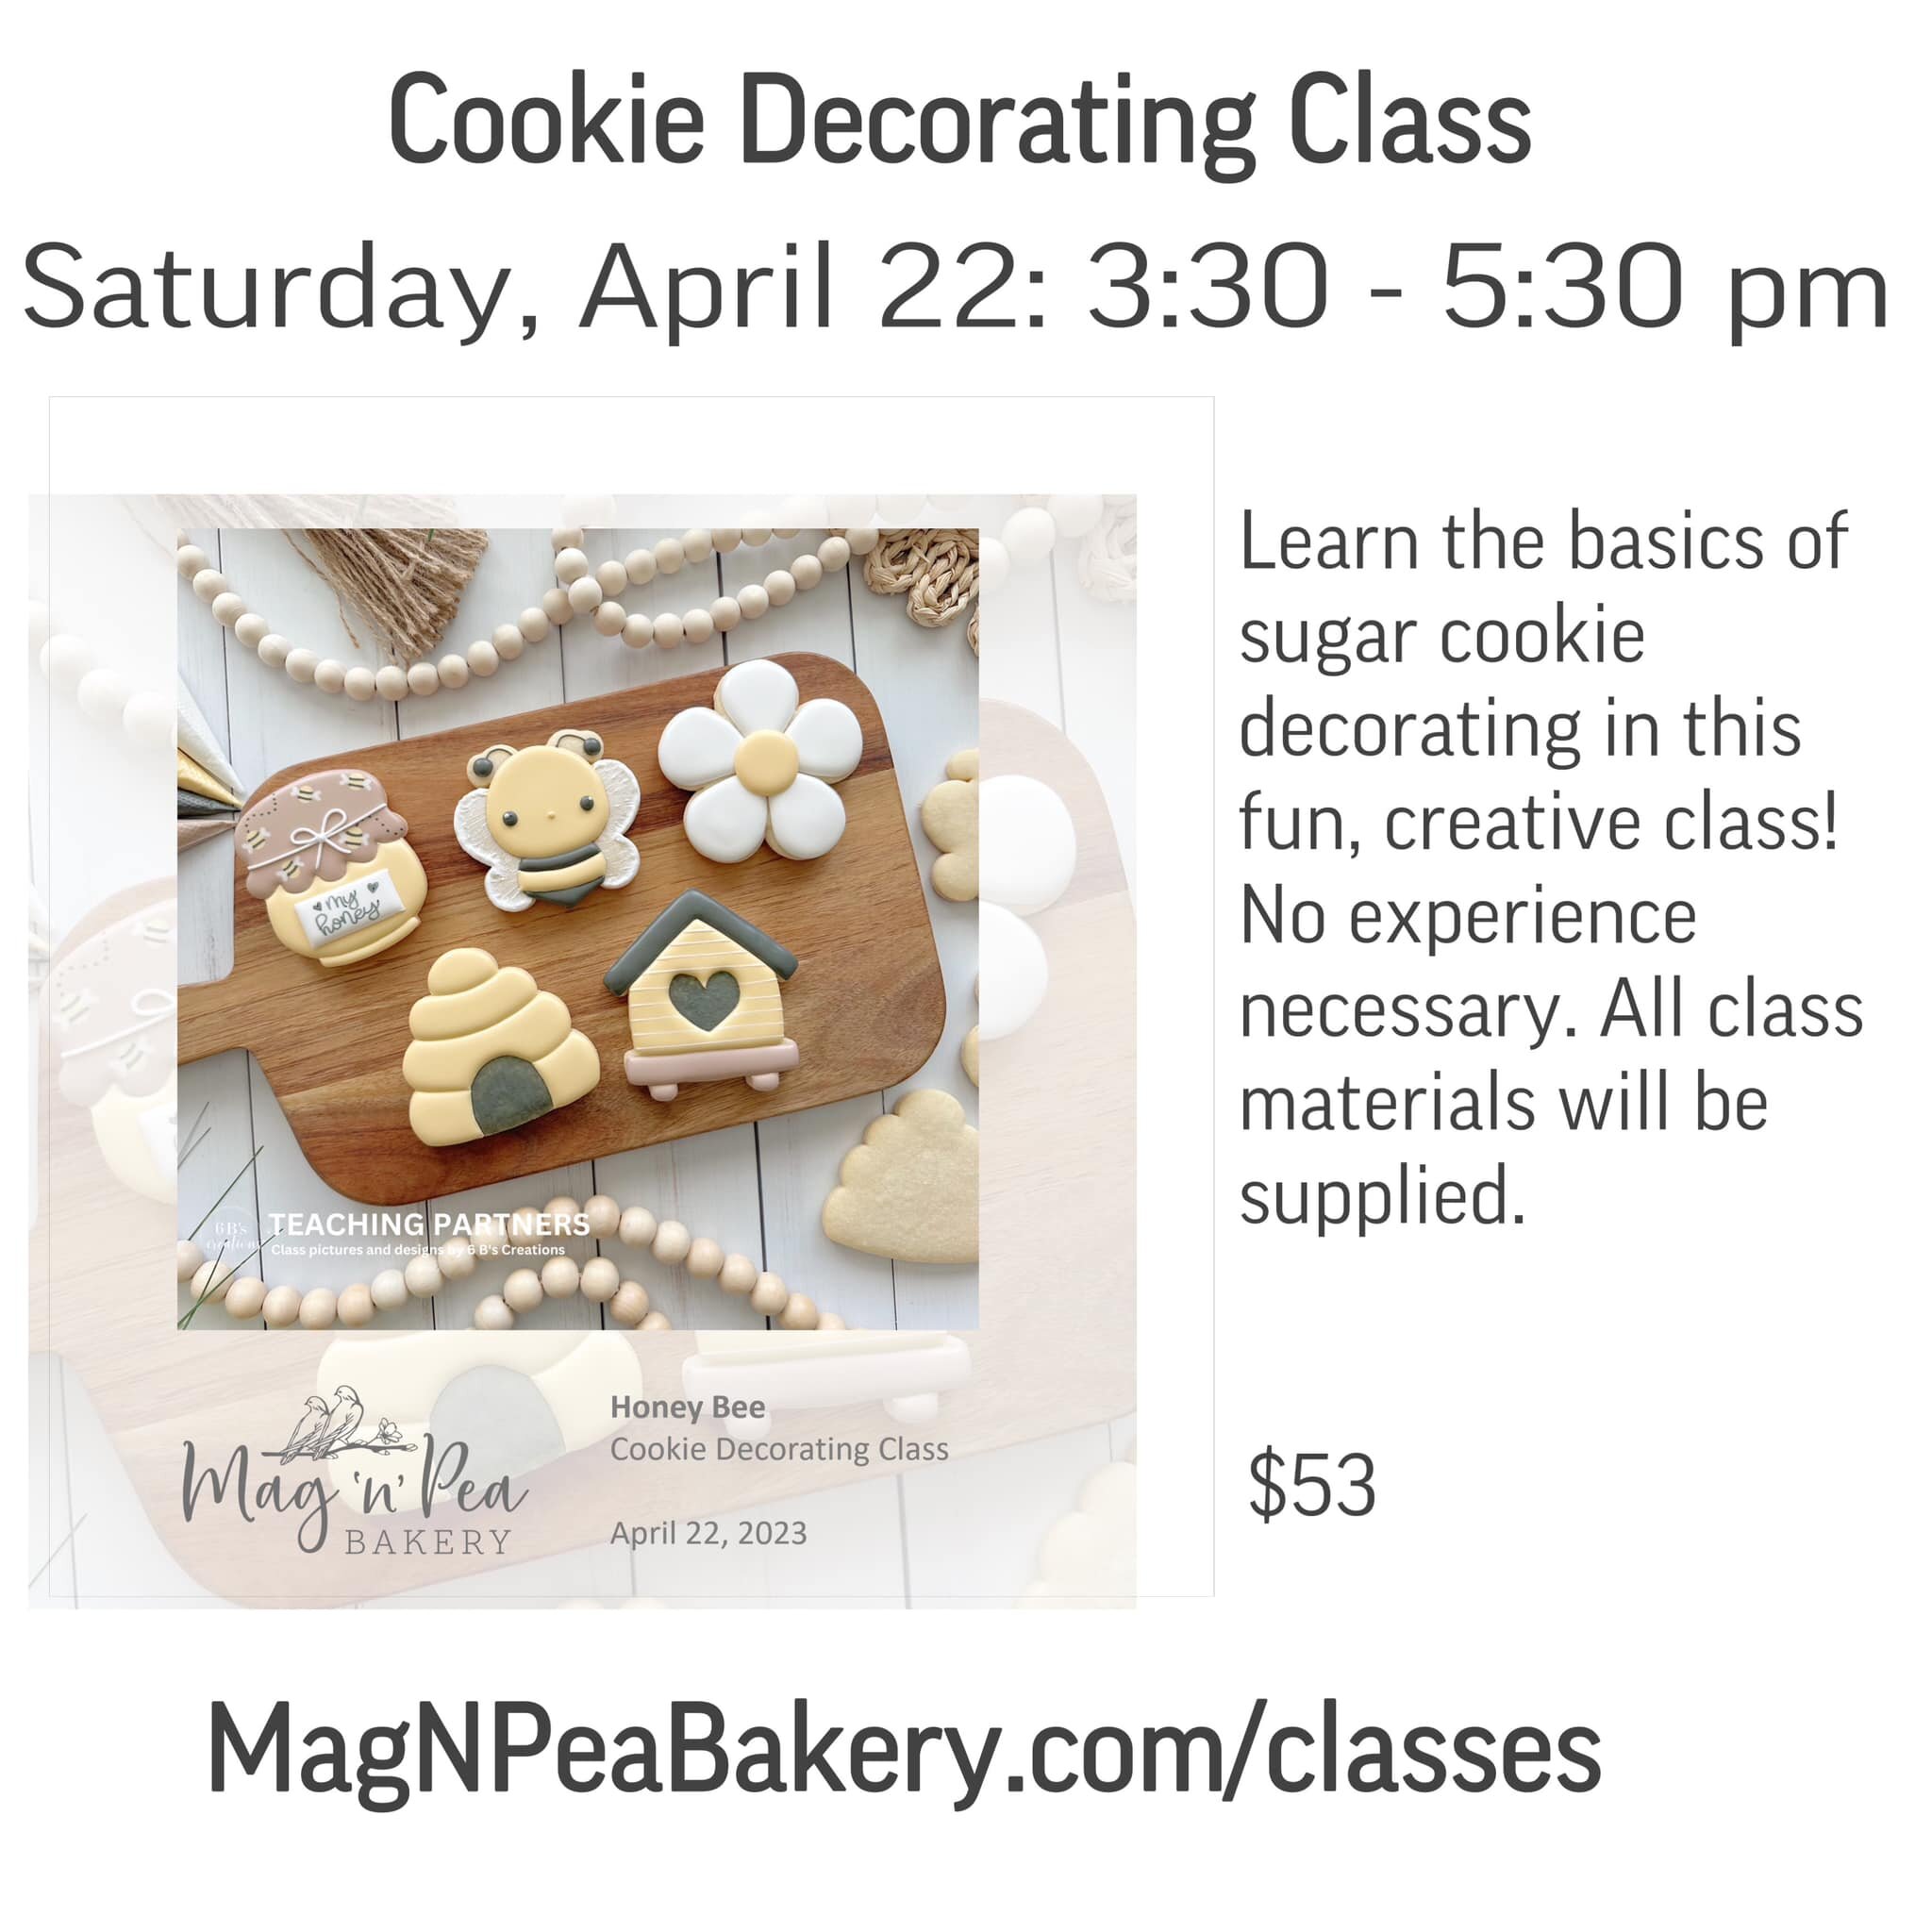 April classes are now open for registration!
Hope to see you there.